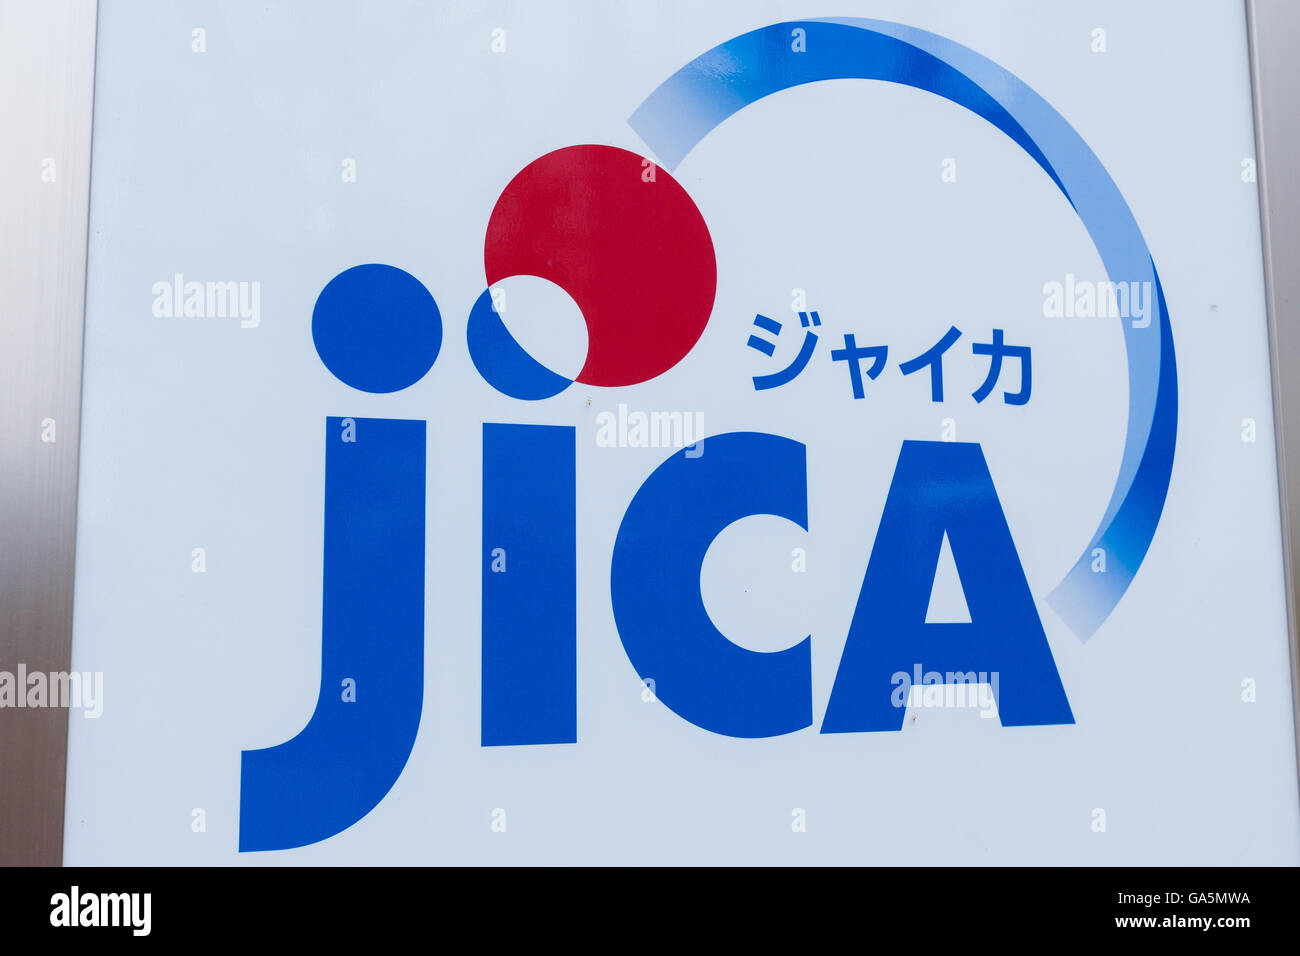 A JICA signboard on display outside its Ichigaya building in Tokyo on July 4, 2016, Japan. Seven Japanese working on a transportation infrastructure project managed by the International Cooperation Agency (JICA) were among 28 who died in a terrorist attack on a cafe in Bangladesh's capital, Dhaka, on July 1st. The Japanese Prime Minister Shinzo Abe expressed his anger over the attack calling it an unforgivable act of terrorism and JICA's President Shinichi Kitaoka also expressed his grief after hearing that seven Japanese had been killed. © Rodrigo Reyes Marin/AFLO/Alamy Live News Stock Photo